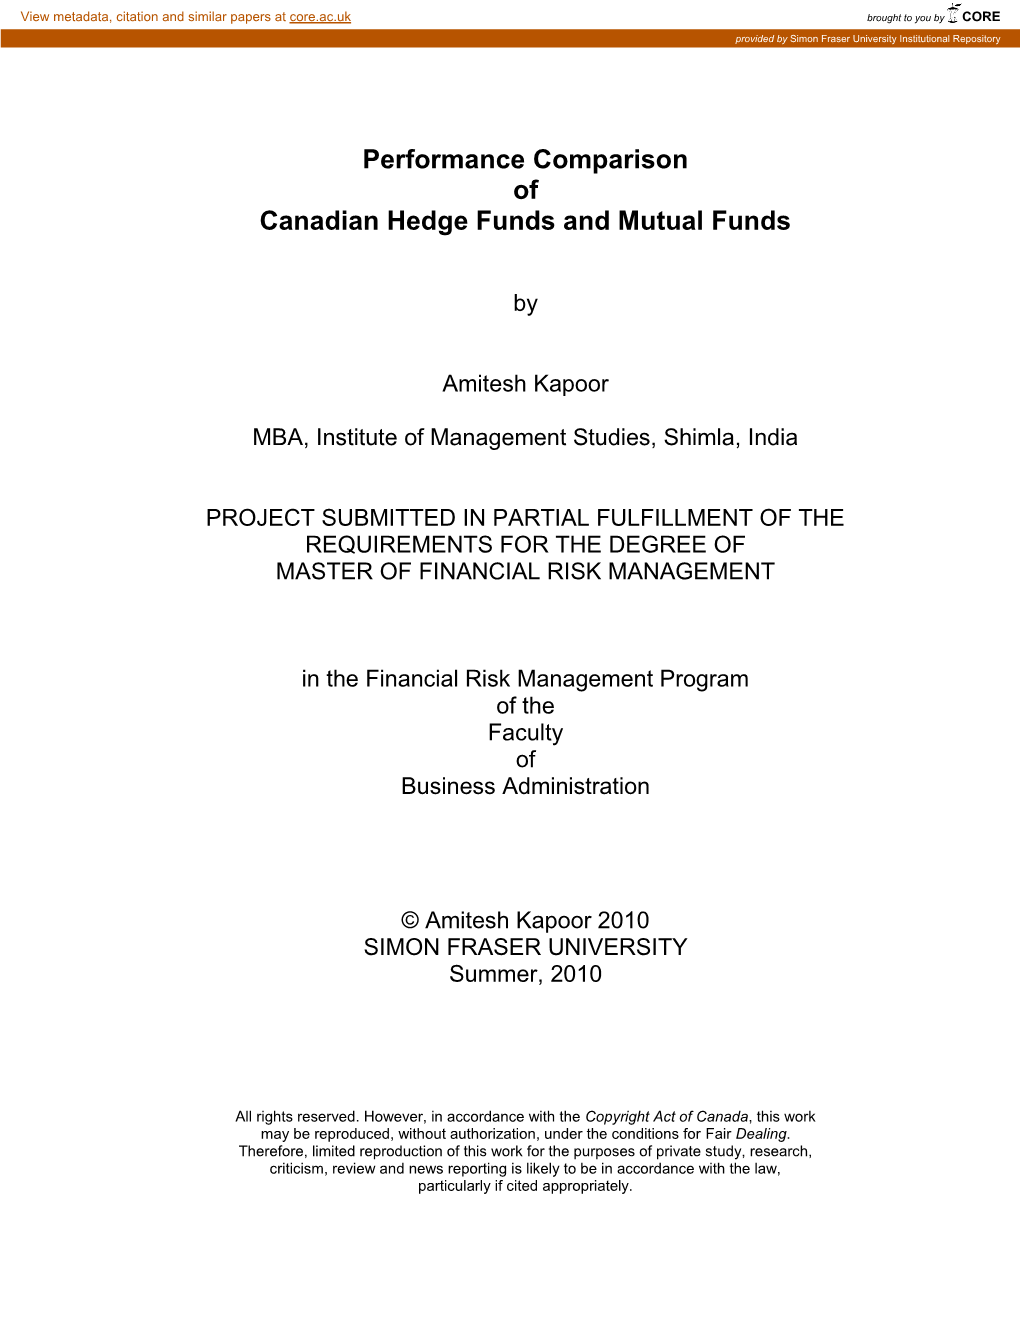 Performance Comparison of Canadian Hedge Funds and Mutual Funds